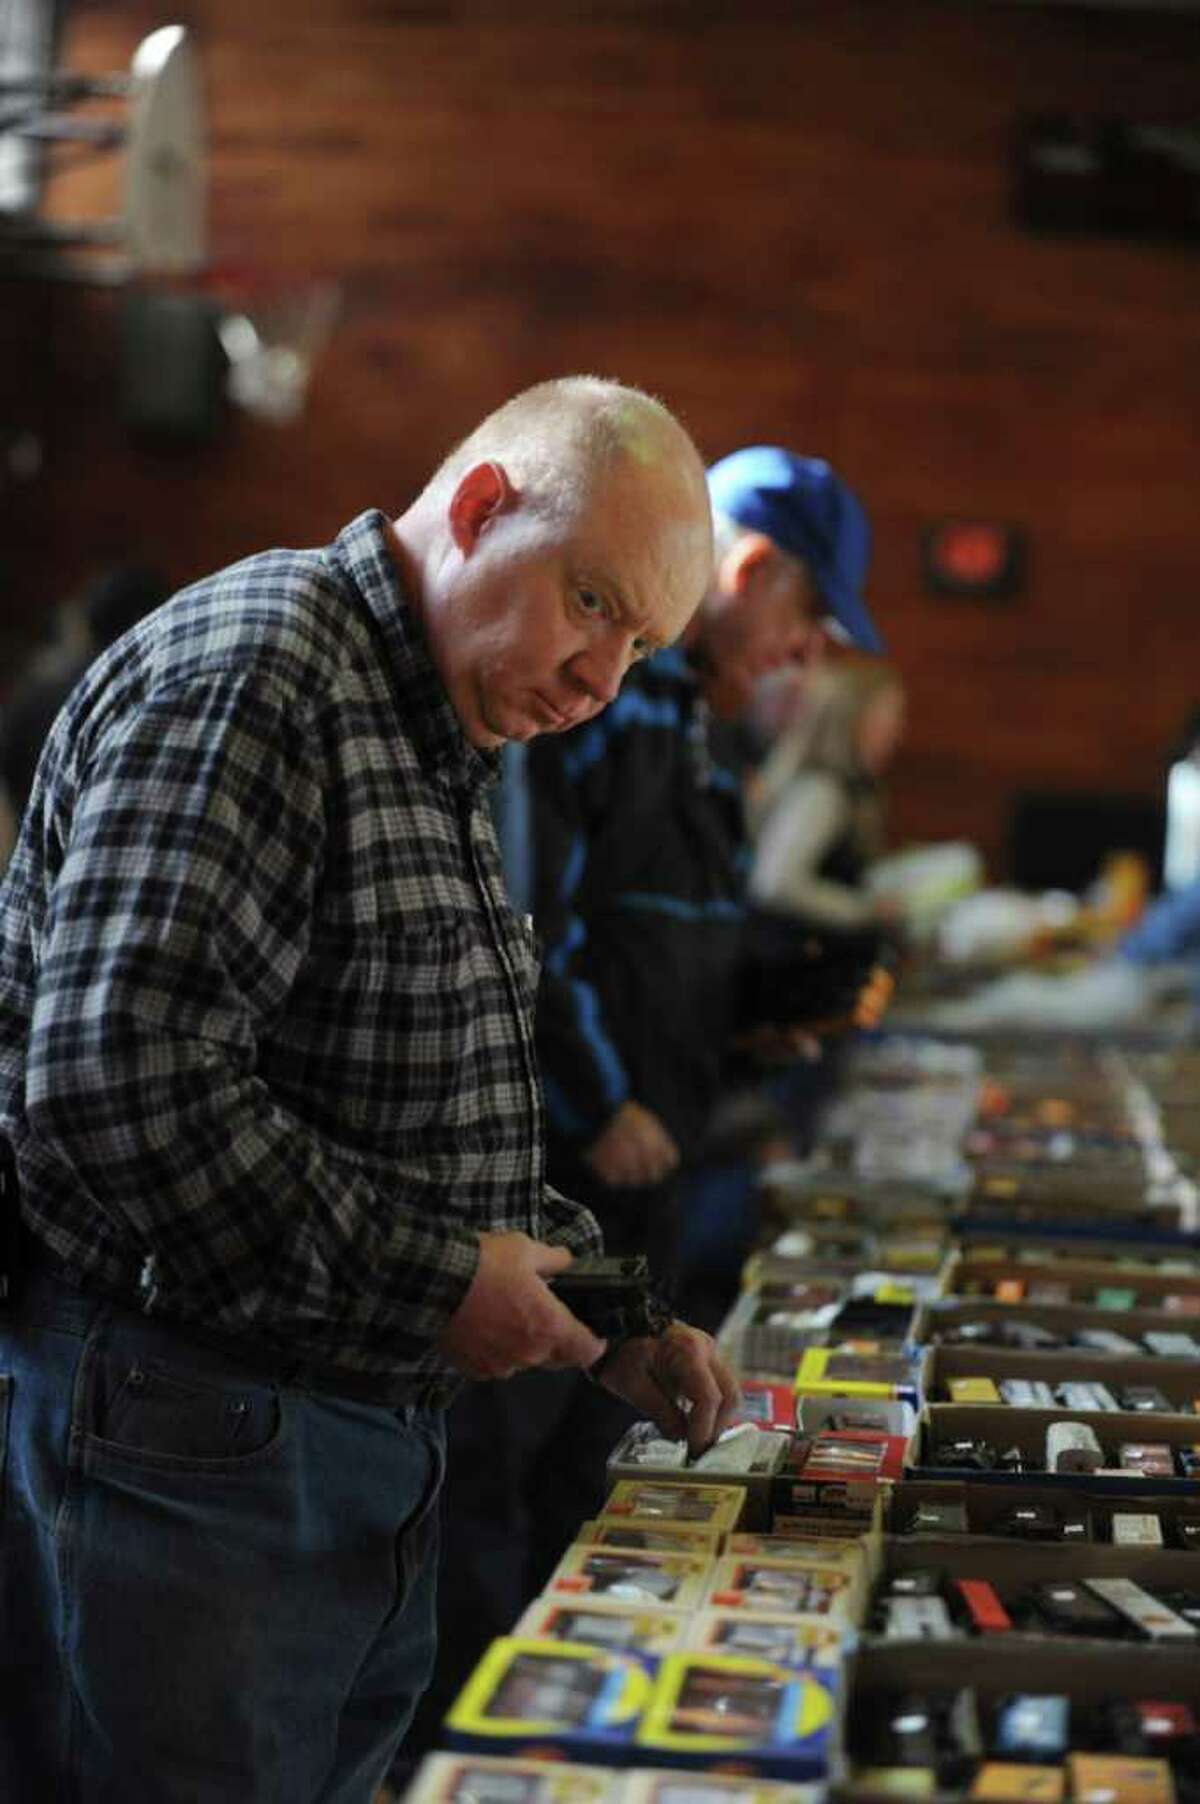 Ken Grogan, of Hartsdale, N.Y., looks at model trains at the Westchester Model Railroad Club's Fall Train Meet at Eastern Greenwich Civic Center Sunday, Nov. 27, 2011.